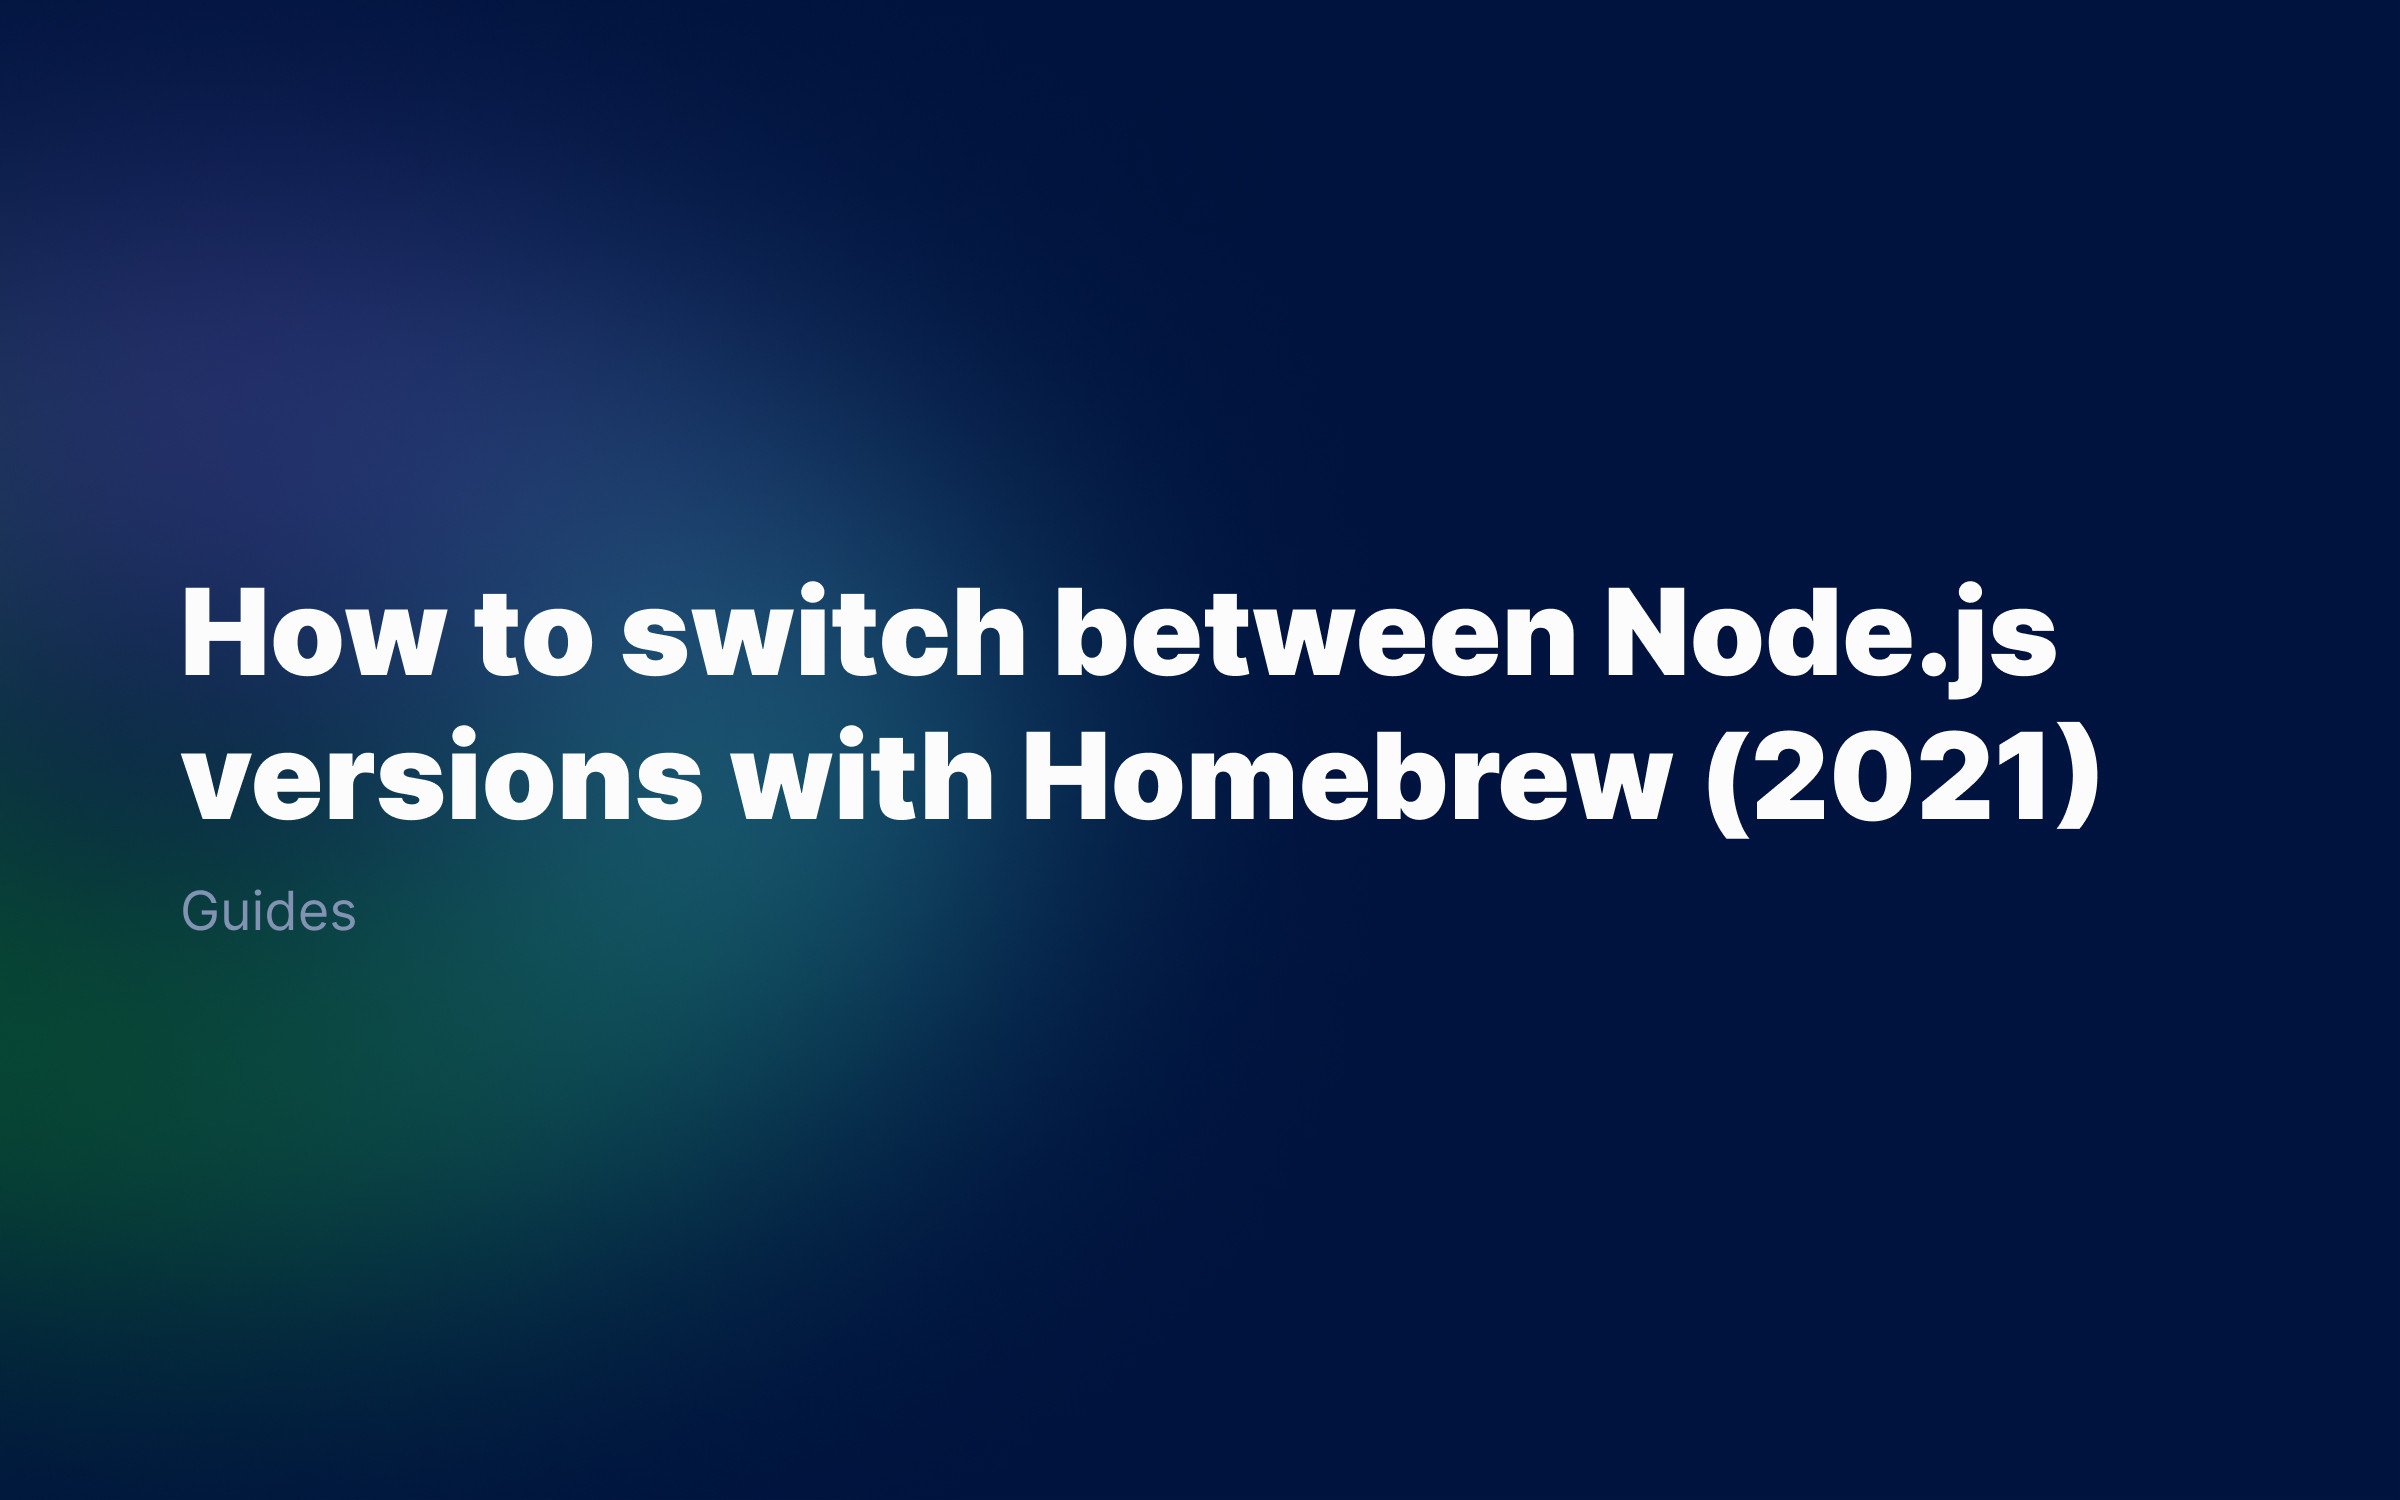 How to switch between Node.js versions with Homebrew (2021)